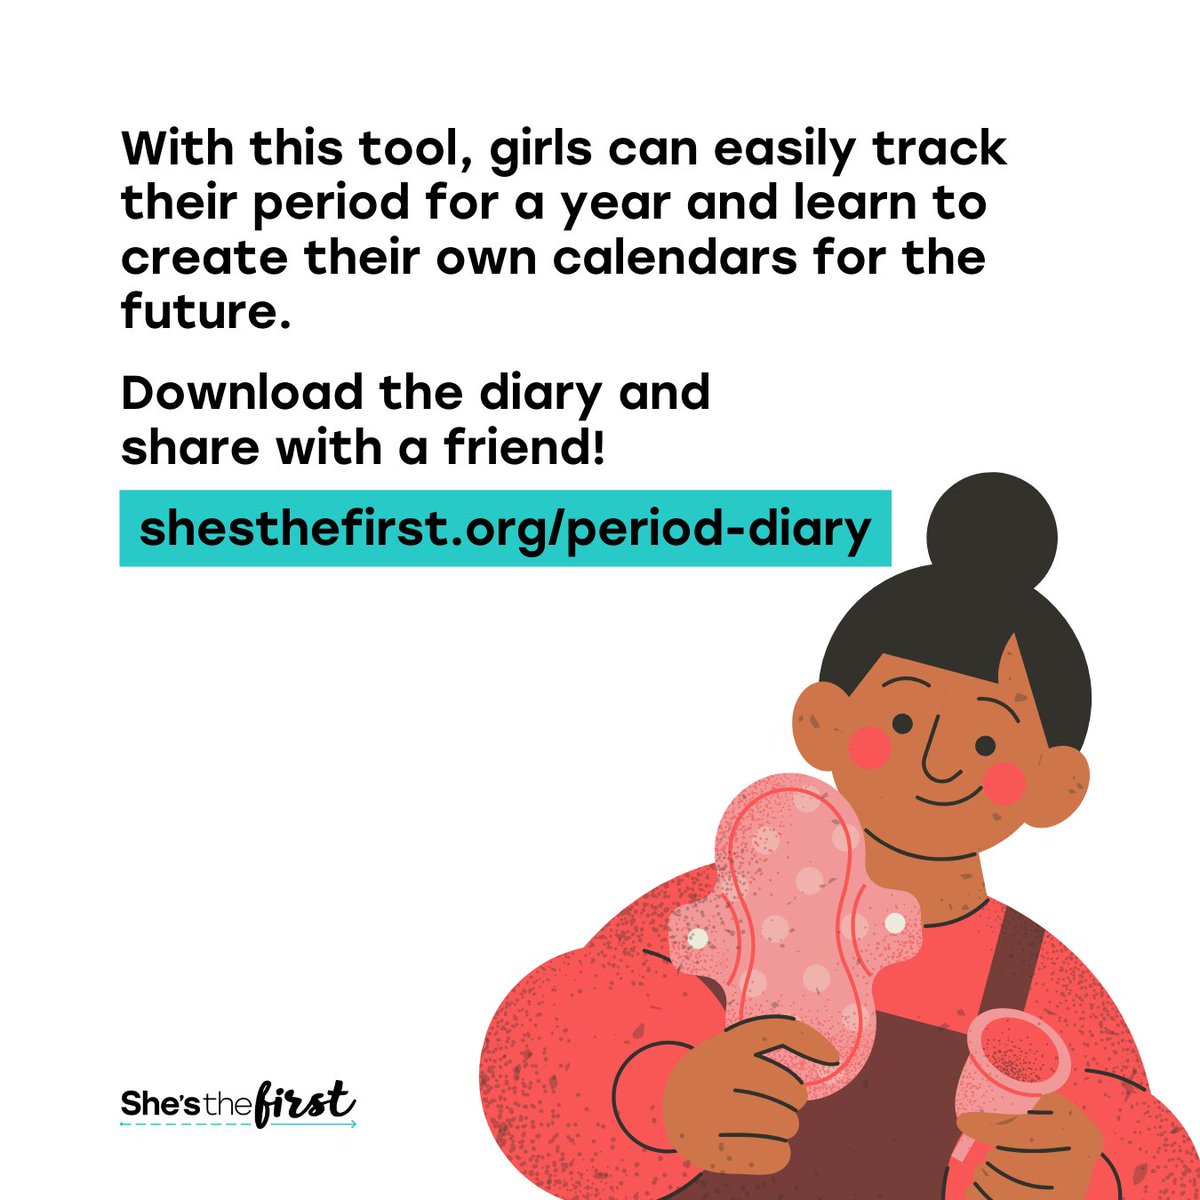 Mentors, we got you too! We have an accompanying guide that offers valuable tools and advice on assisting girls in their journey of understanding their menstrual cycles. Access it here: shesthefirst.org/period-diary/#…